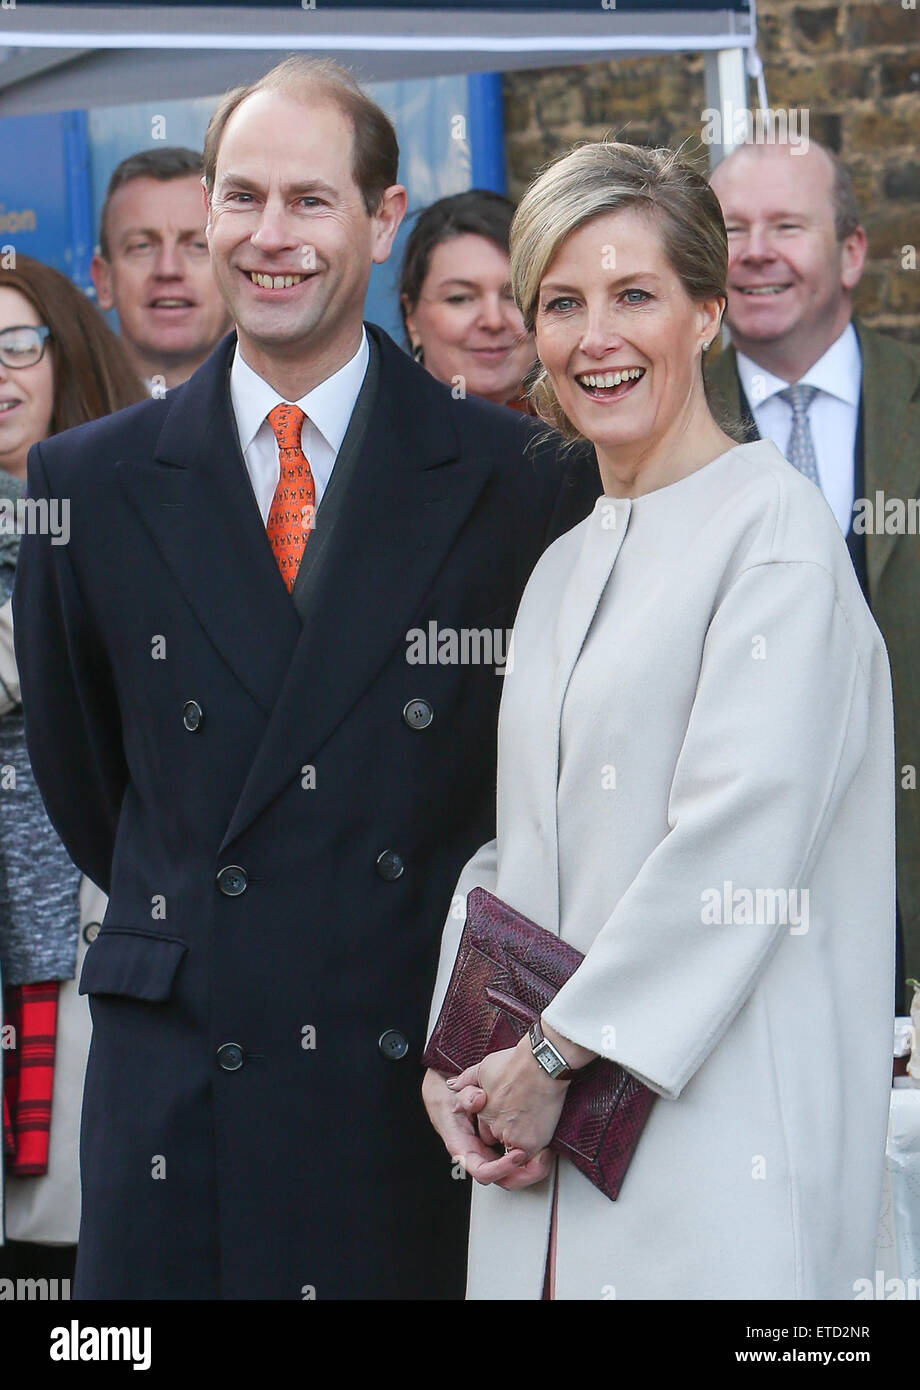 The Earl and Countess of Wessex visit Tomorrow's People Social Enterprise's at St. Anselm'a Church in Kennington on her 50th birthday  Featuring: Sophie Countess of Wessex, Prince Edward Where: London, United Kingdom When: 20 Jan 2015 Credit: WENN.com Stock Photo